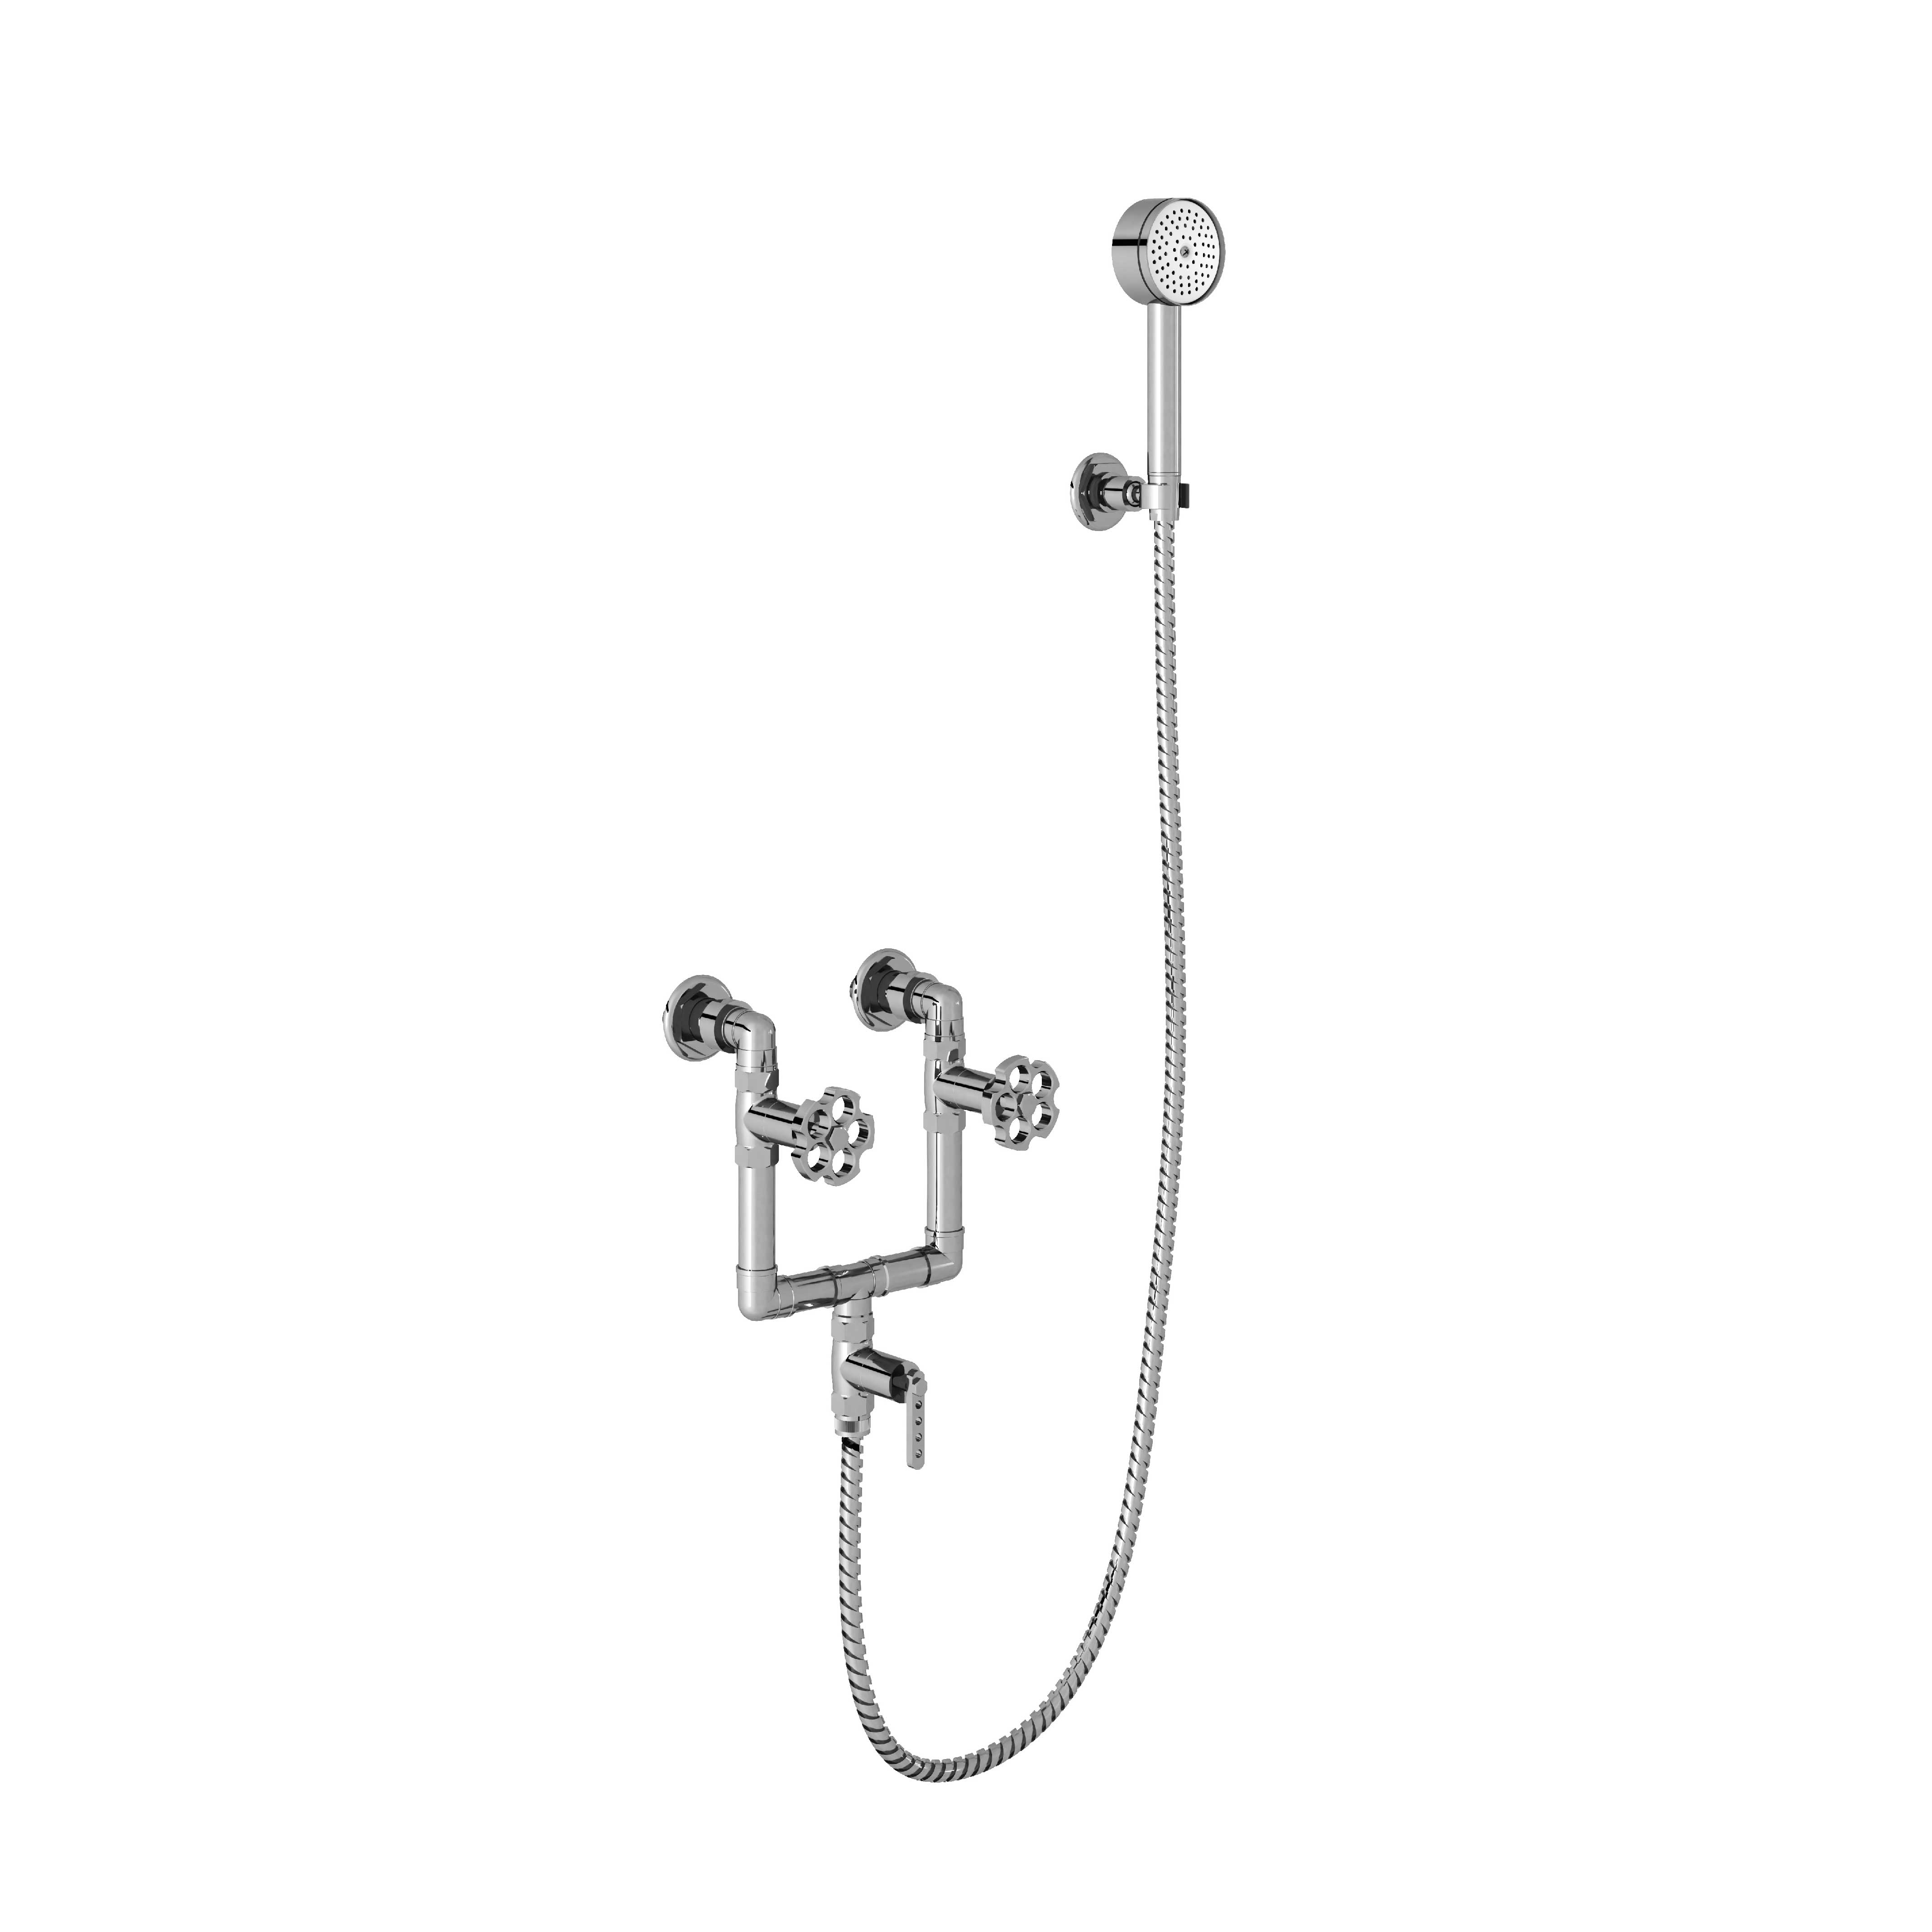 M81-2201 Shower mixer with hook